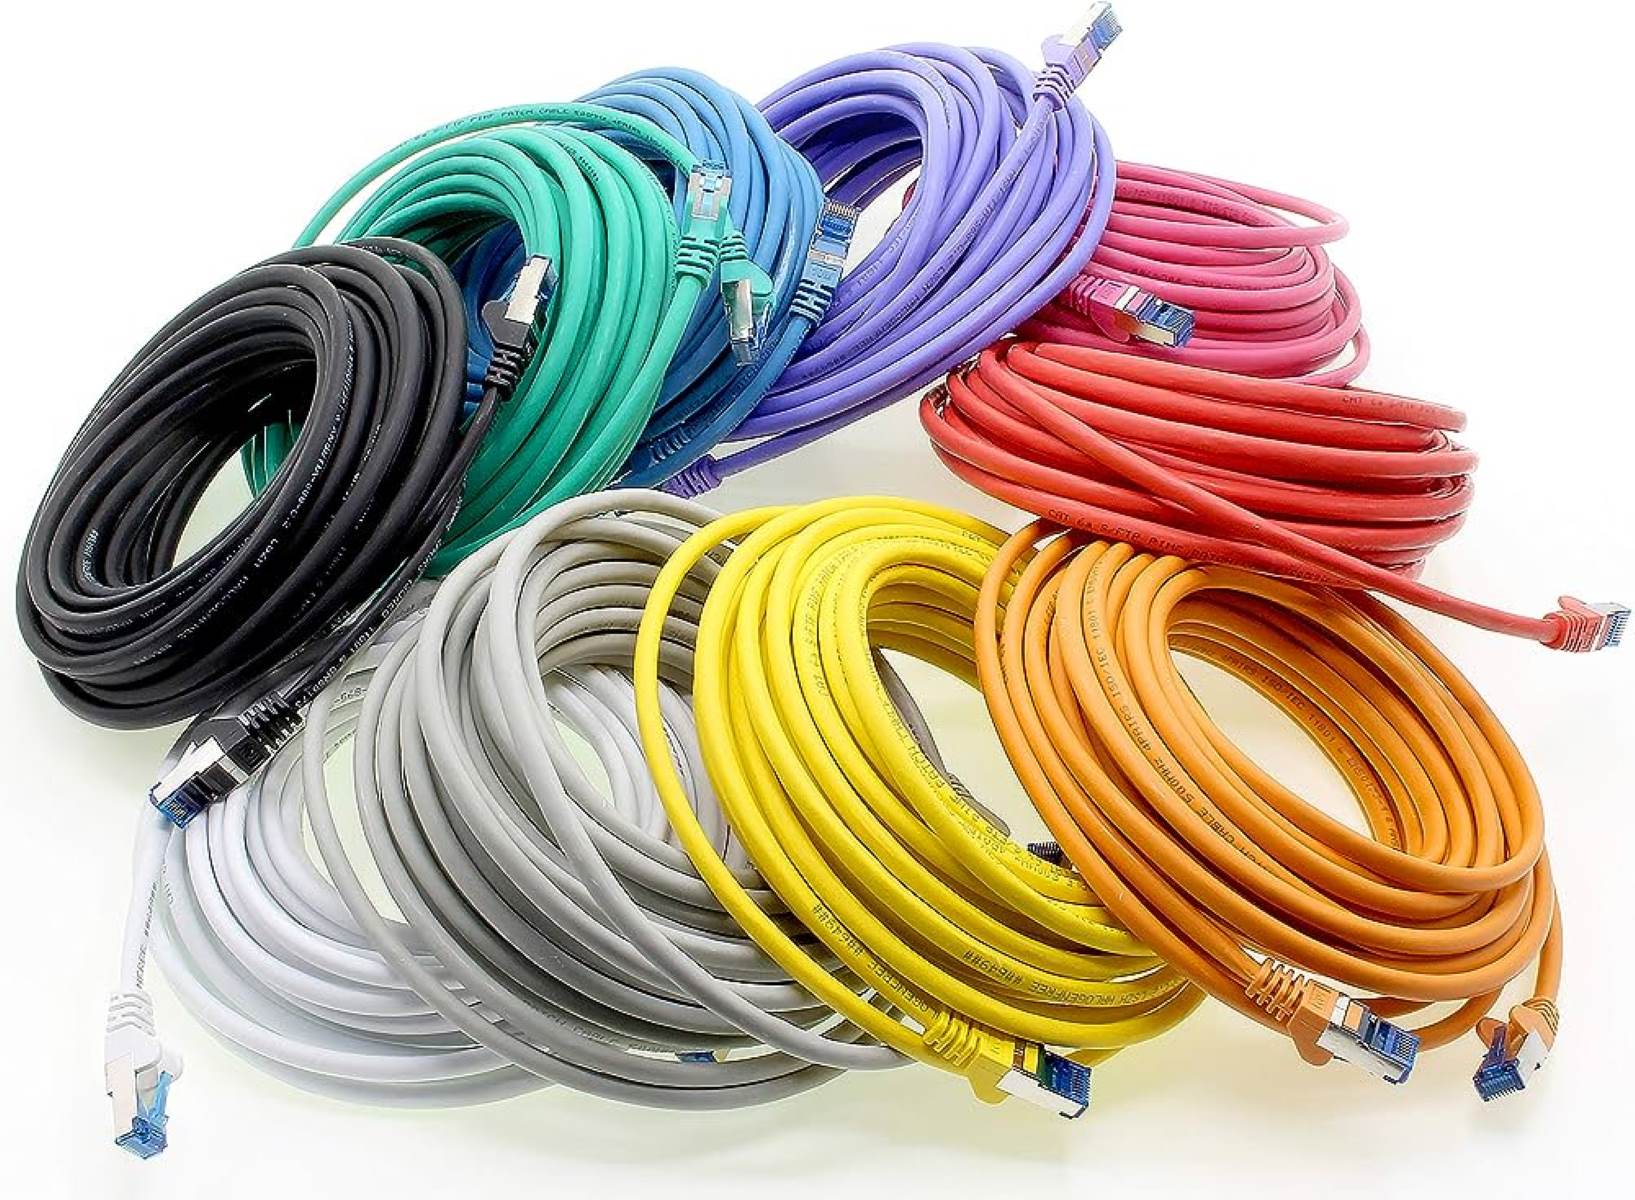 what-is-the-maximum-cable-length-for-an-ethernet-utp-cable